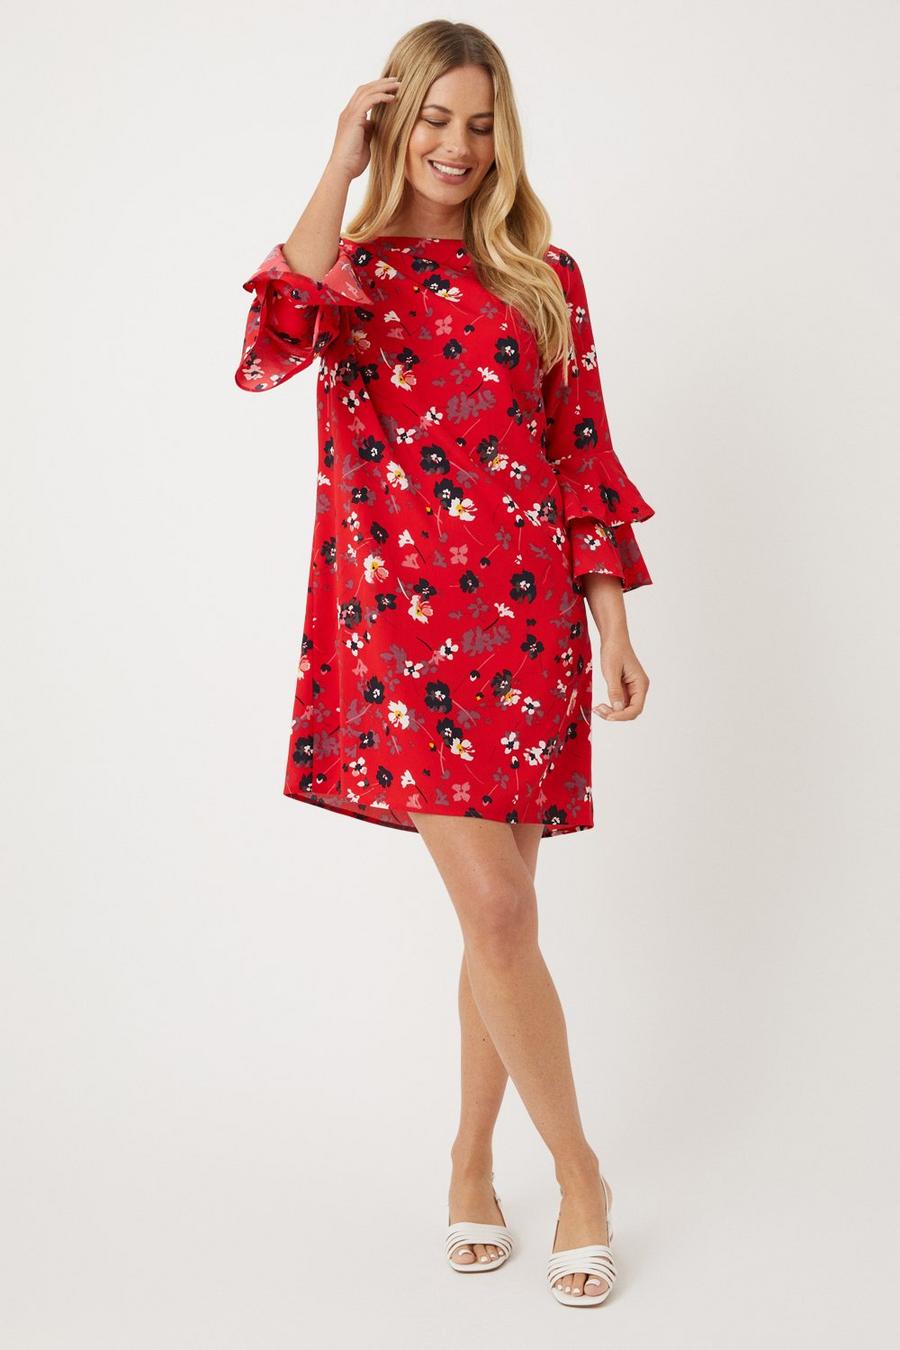 Petite Red Floral Shift Dress